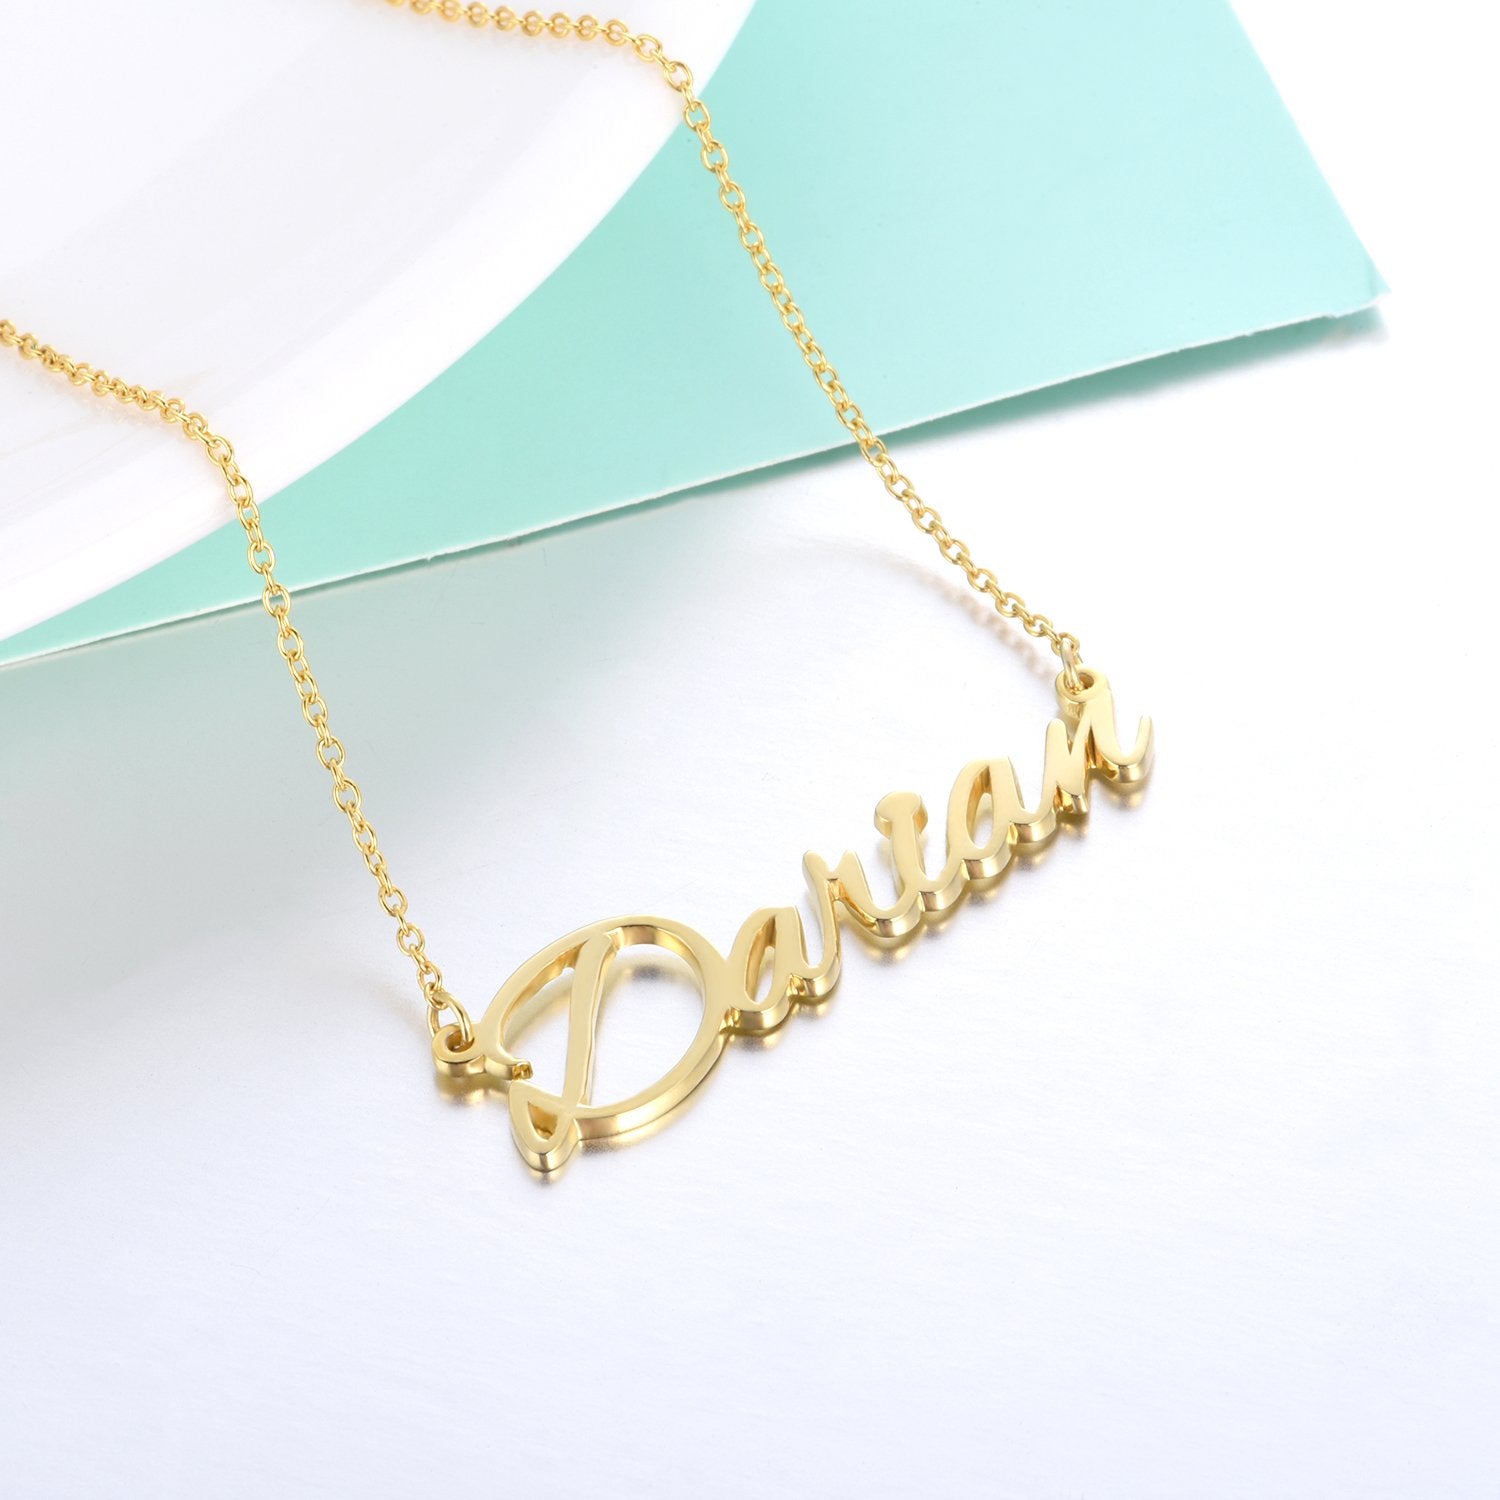 Darian - Custom Name Necklace - Yellow Gold Plated